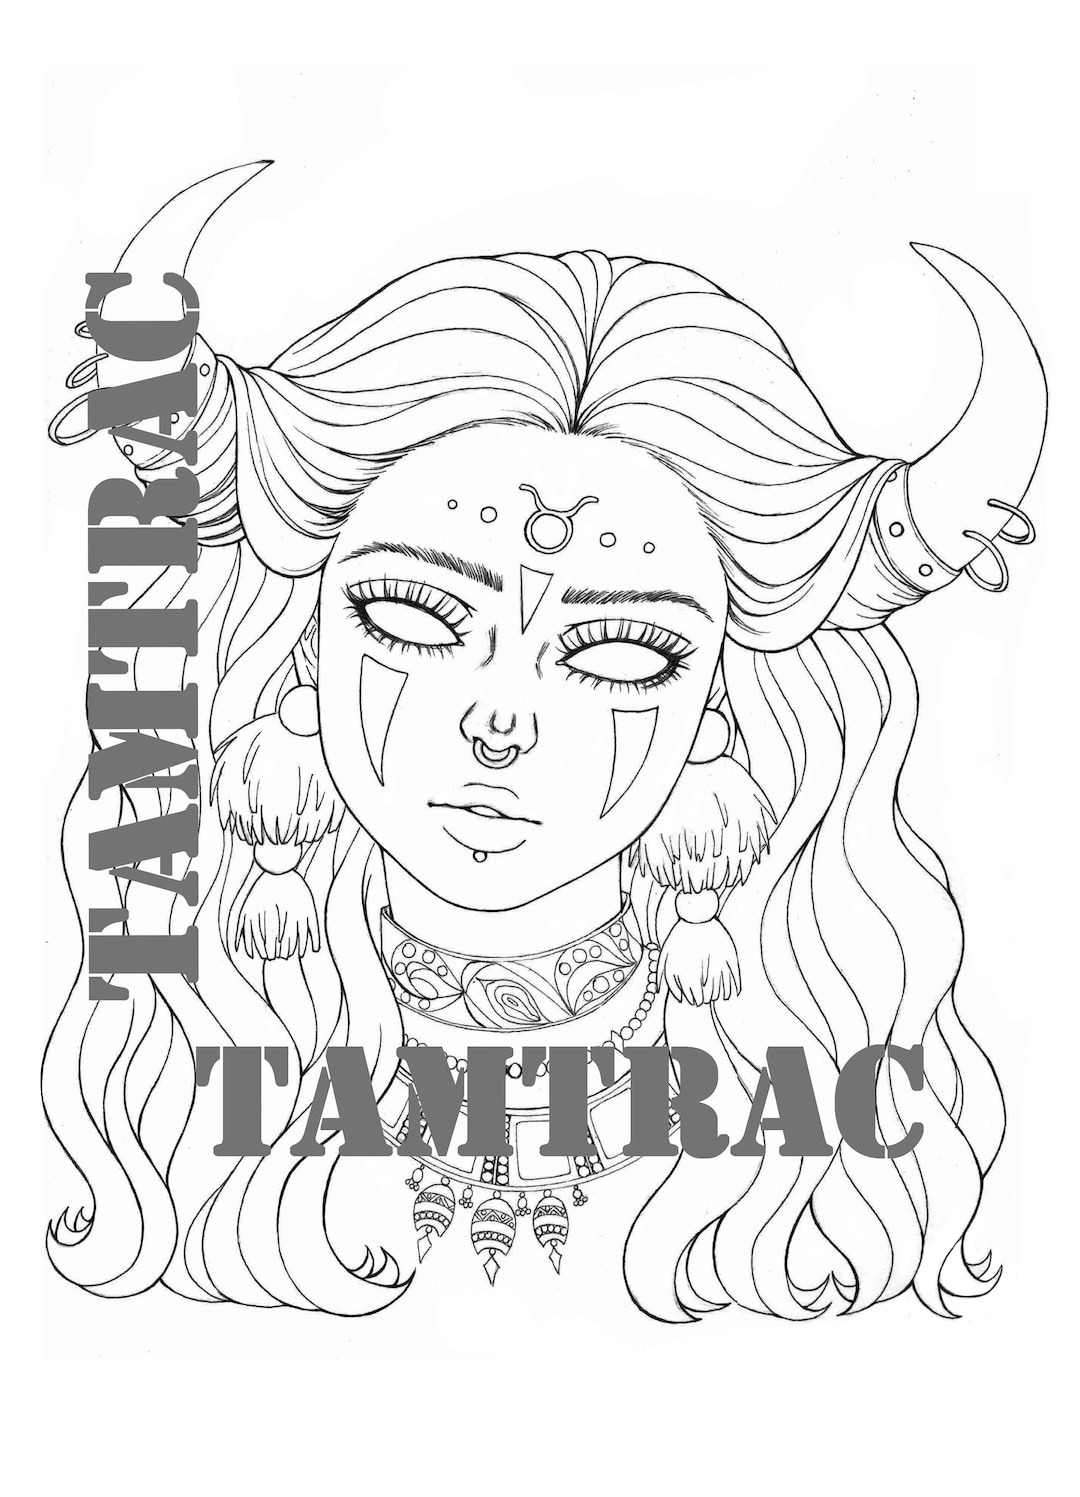 Coloring Page Taurus Zodiac Girl 12 Signs A4 Printable - Etsy